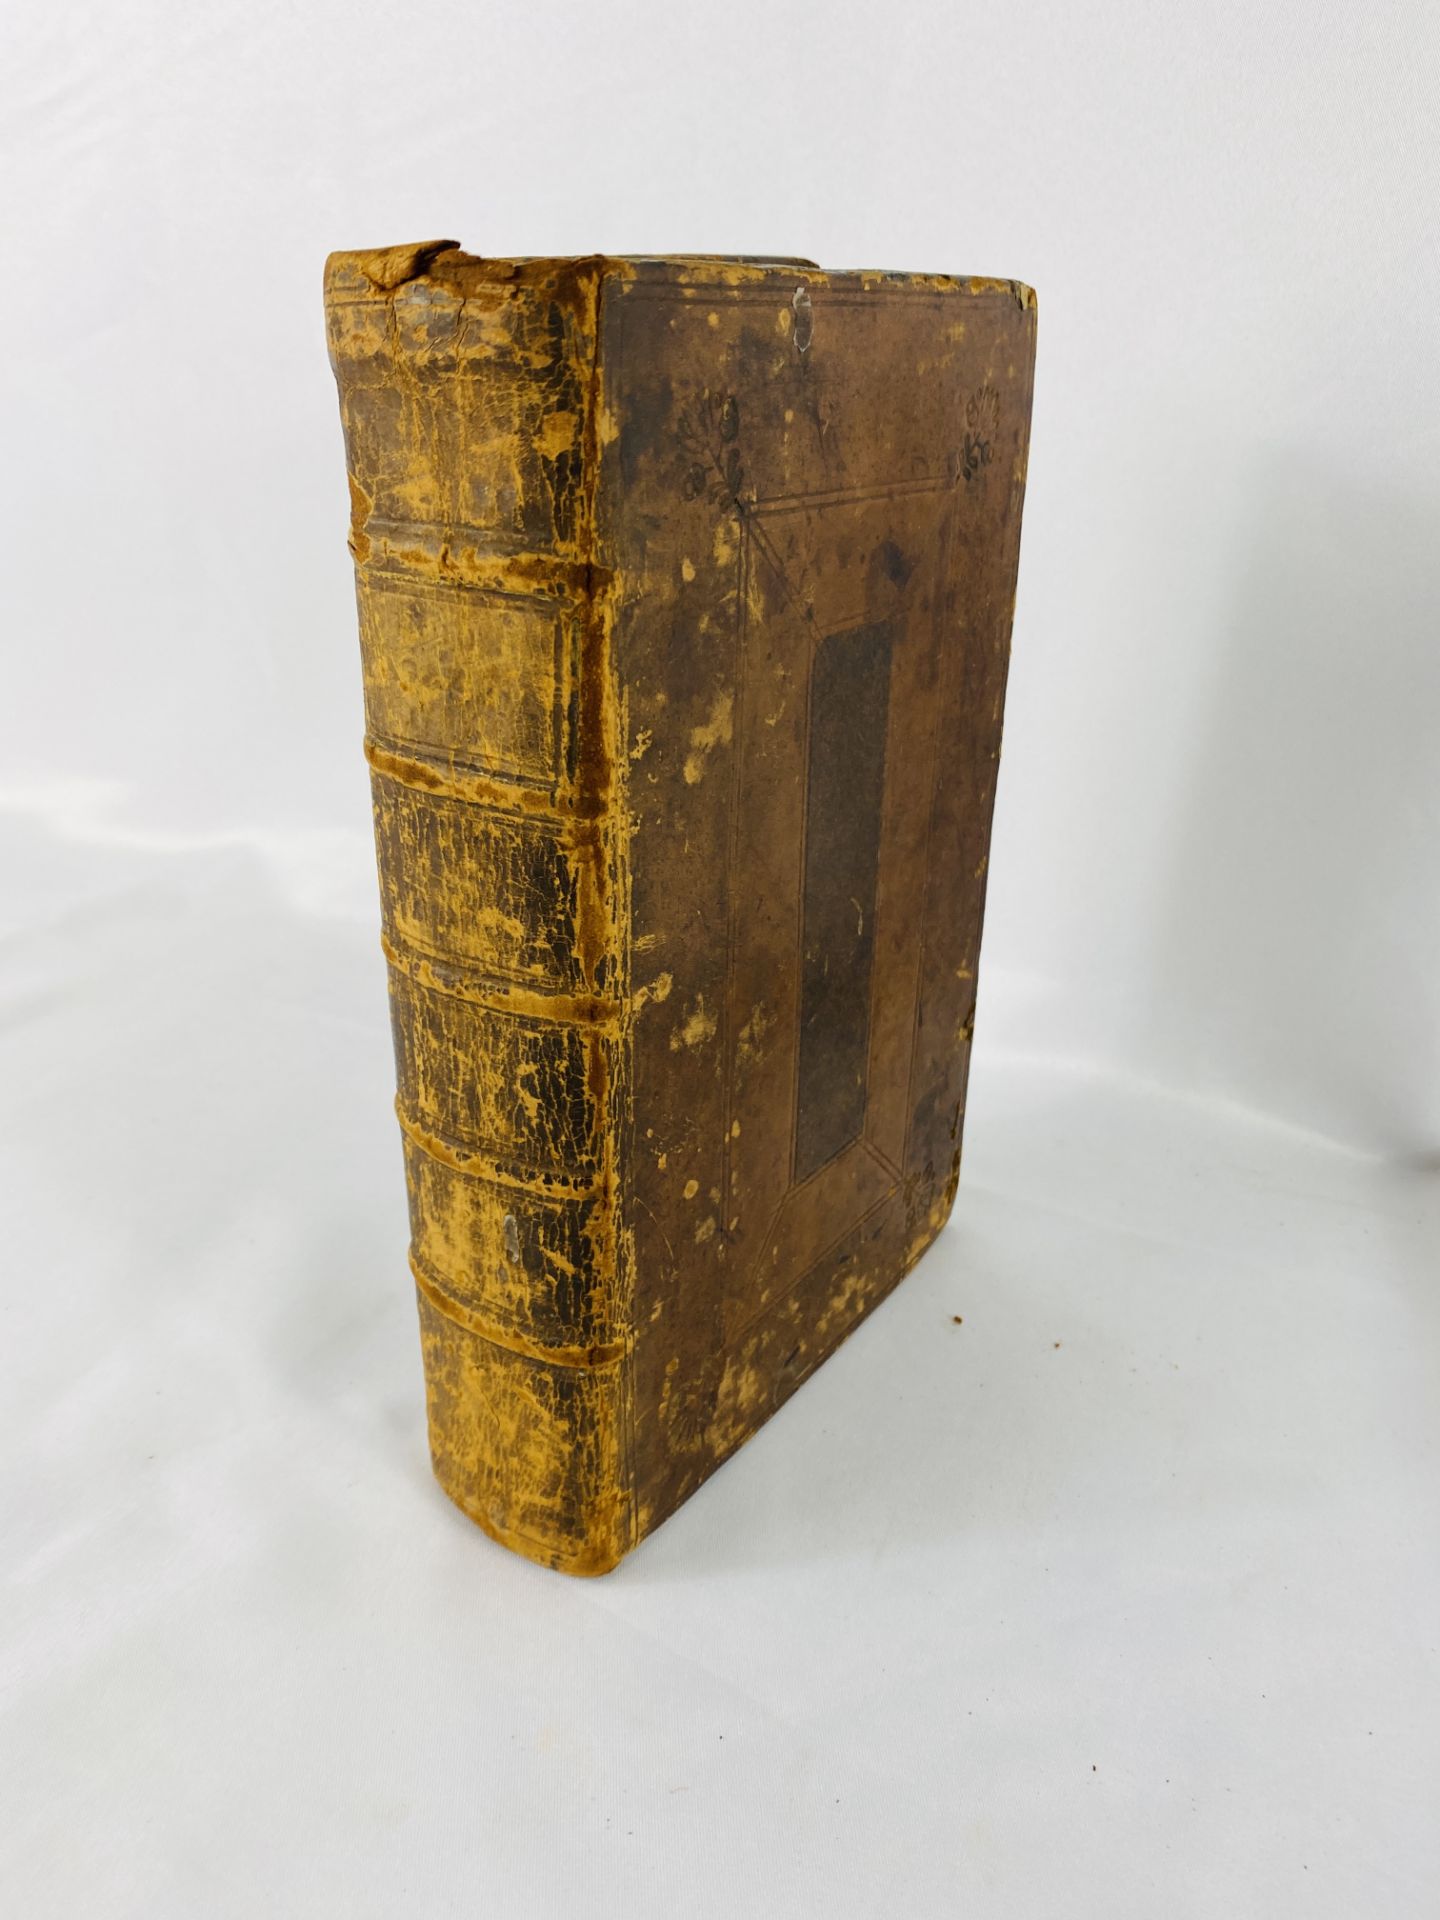 Leather bound book, The London magazine and Monthly Chronologer, 1736